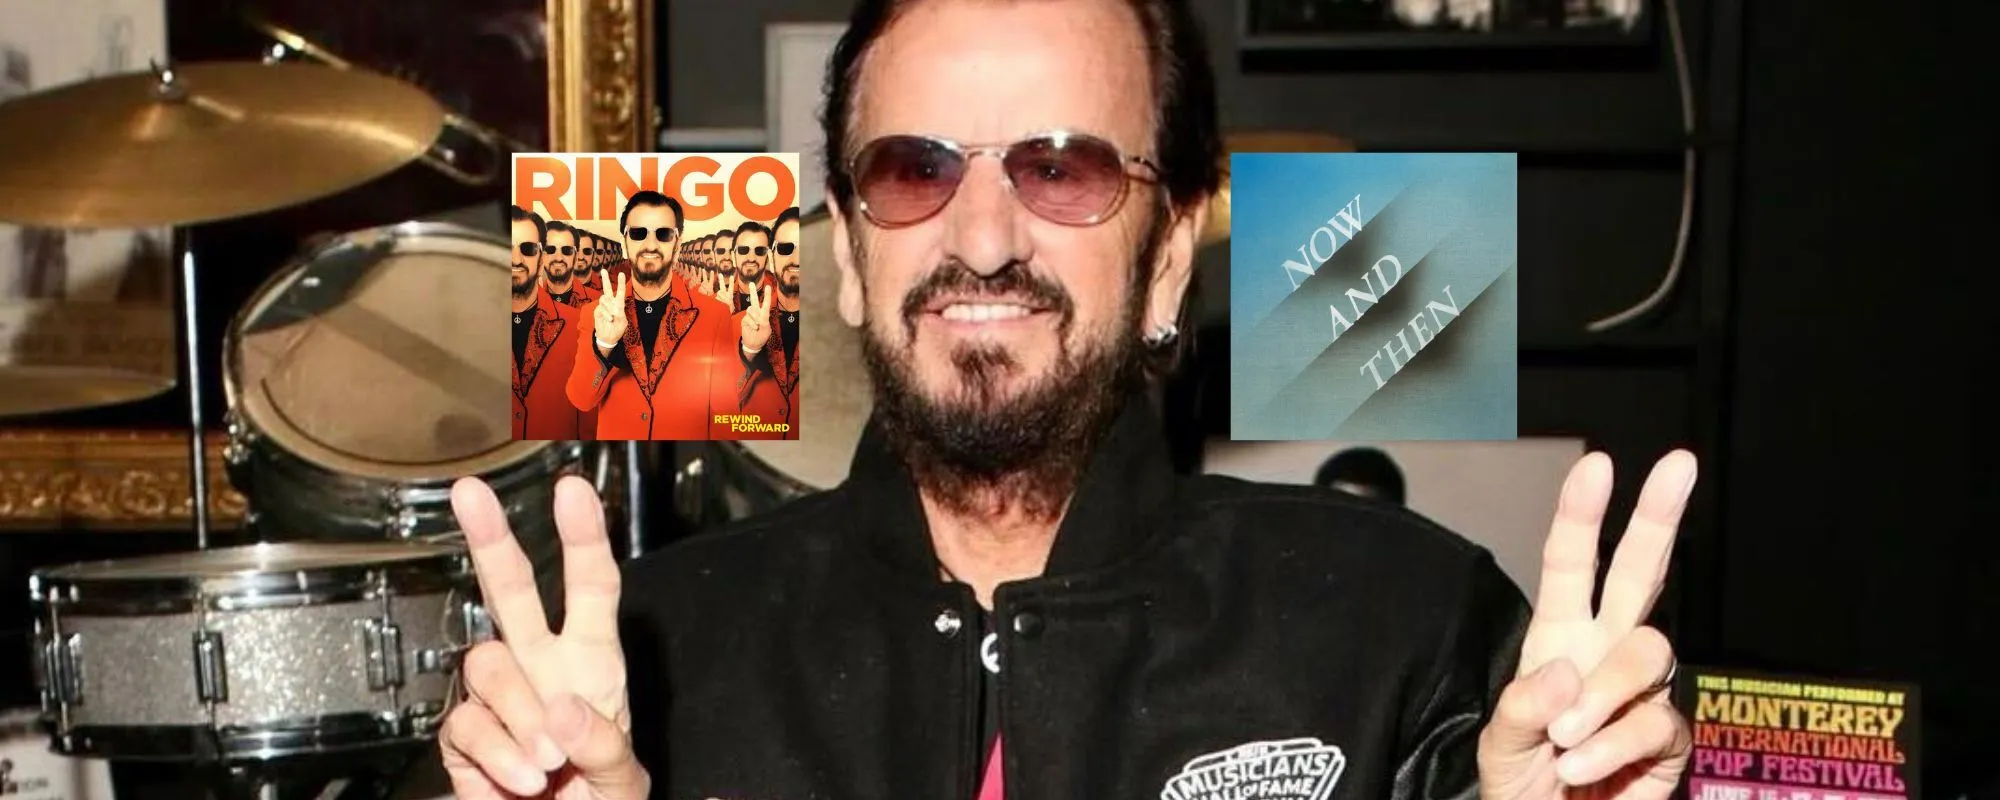 Ringo Starr Shares His Excitement About New Beatles Song: “What a Great Week”